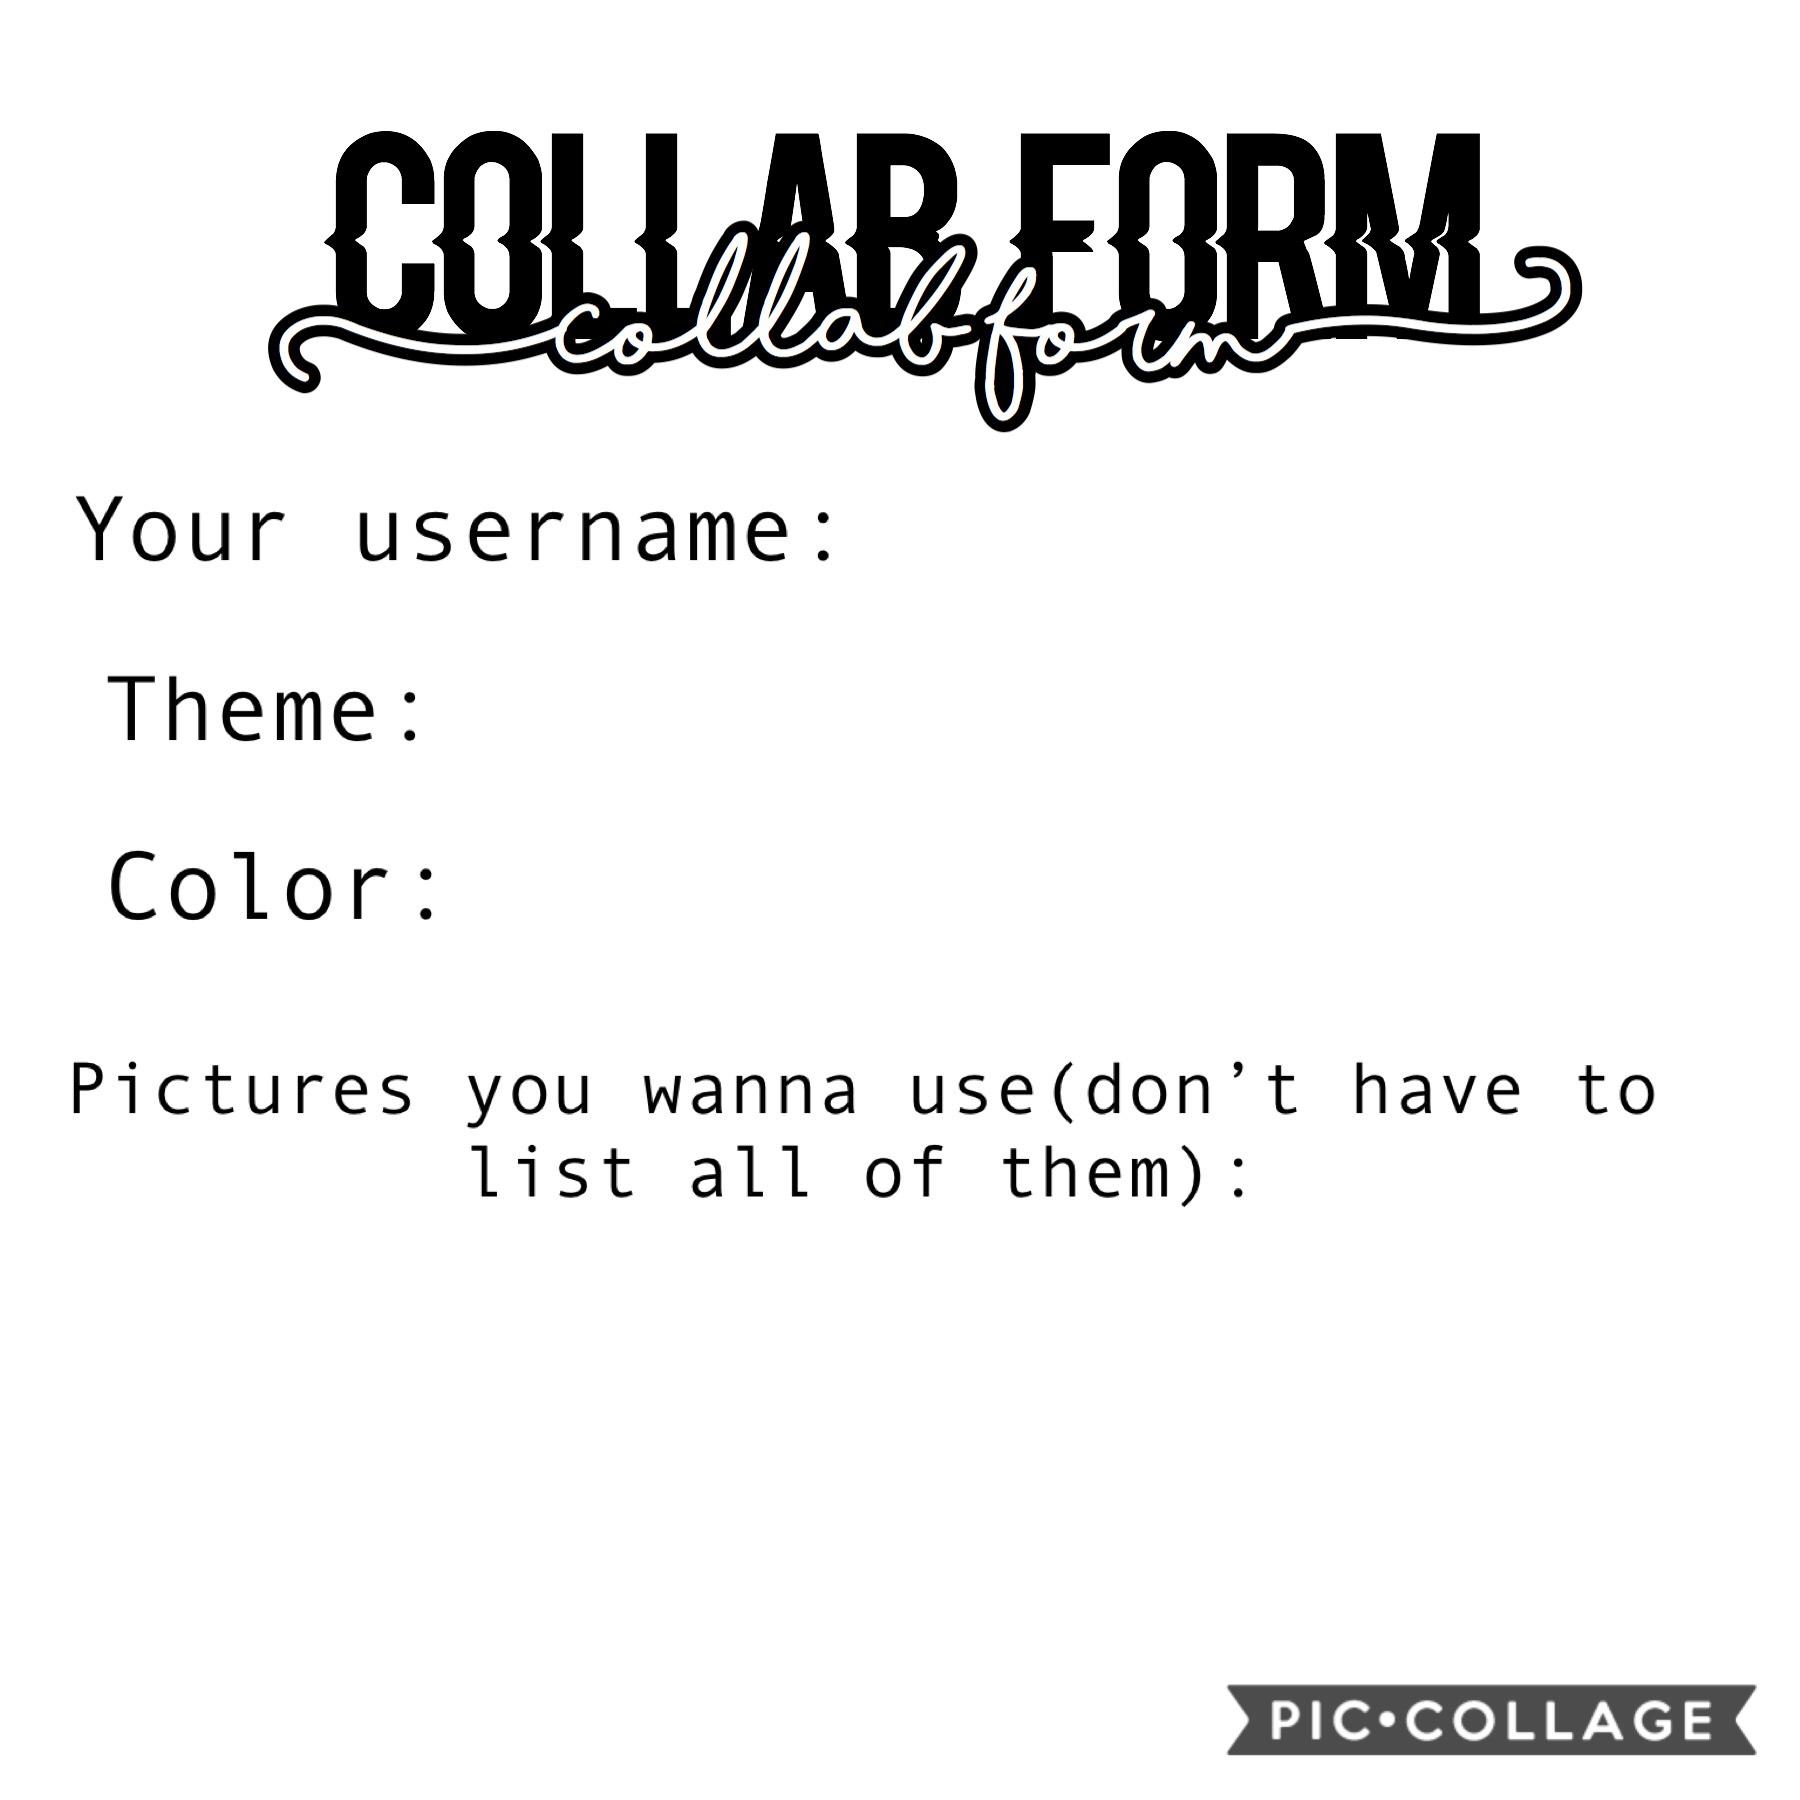 💕Collab form i talked about! 💕🤩🤩Fill the form if u wanna do the collab! You r always welcome to do that!🤩🤩🤩😙😙😙